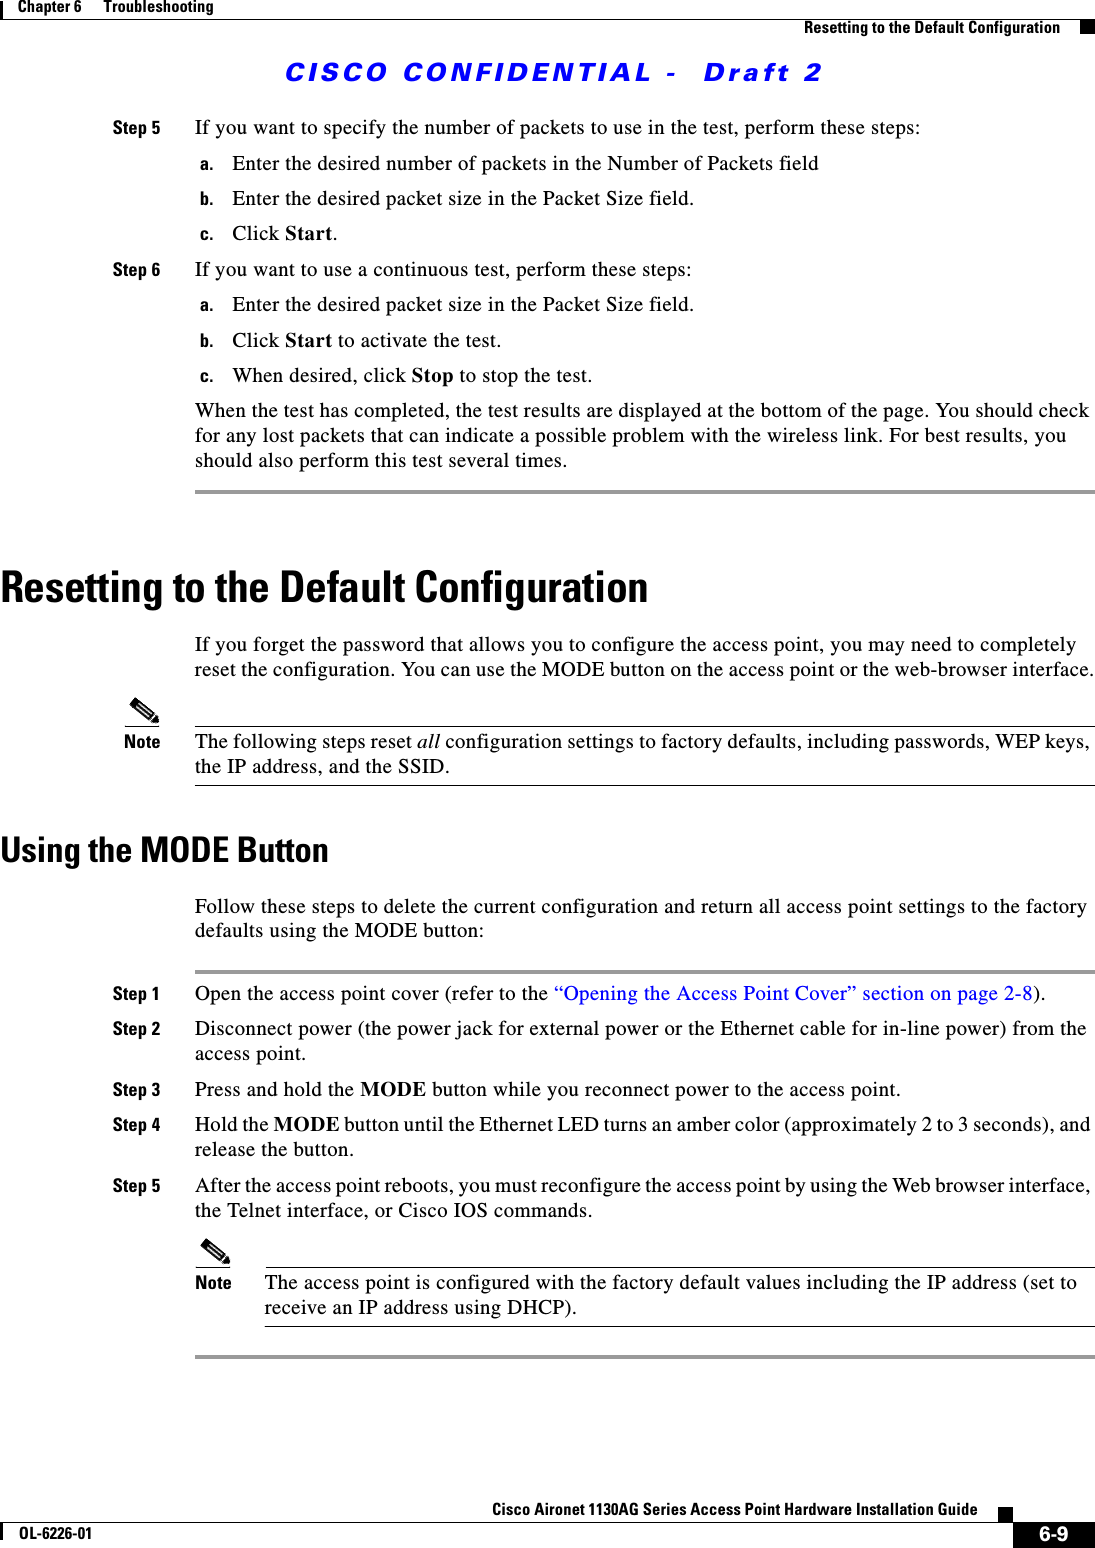  CISCO CONFIDENTIAL -  Draft 26-9Cisco Aironet 1130AG Series Access Point Hardware Installation GuideOL-6226-01Chapter 6      TroubleshootingResetting to the Default ConfigurationStep 5 If you want to specify the number of packets to use in the test, perform these steps:a. Enter the desired number of packets in the Number of Packets fieldb. Enter the desired packet size in the Packet Size field.c. Click Start.Step 6 If you want to use a continuous test, perform these steps:a. Enter the desired packet size in the Packet Size field.b. Click Start to activate the test.c. When desired, click Stop to stop the test.When the test has completed, the test results are displayed at the bottom of the page. You should check for any lost packets that can indicate a possible problem with the wireless link. For best results, you should also perform this test several times.Resetting to the Default ConfigurationIf you forget the password that allows you to configure the access point, you may need to completely reset the configuration. You can use the MODE button on the access point or the web-browser interface.Note The following steps reset all configuration settings to factory defaults, including passwords, WEP keys, the IP address, and the SSID. Using the MODE ButtonFollow these steps to delete the current configuration and return all access point settings to the factory defaults using the MODE button:Step 1 Open the access point cover (refer to the “Opening the Access Point Cover” section on page 2-8).Step 2 Disconnect power (the power jack for external power or the Ethernet cable for in-line power) from the access point.Step 3 Press and hold the MODE button while you reconnect power to the access point.Step 4 Hold the MODE button until the Ethernet LED turns an amber color (approximately 2 to 3 seconds), and release the button.Step 5 After the access point reboots, you must reconfigure the access point by using the Web browser interface, the Telnet interface, or Cisco IOS commands.Note The access point is configured with the factory default values including the IP address (set to receive an IP address using DHCP).